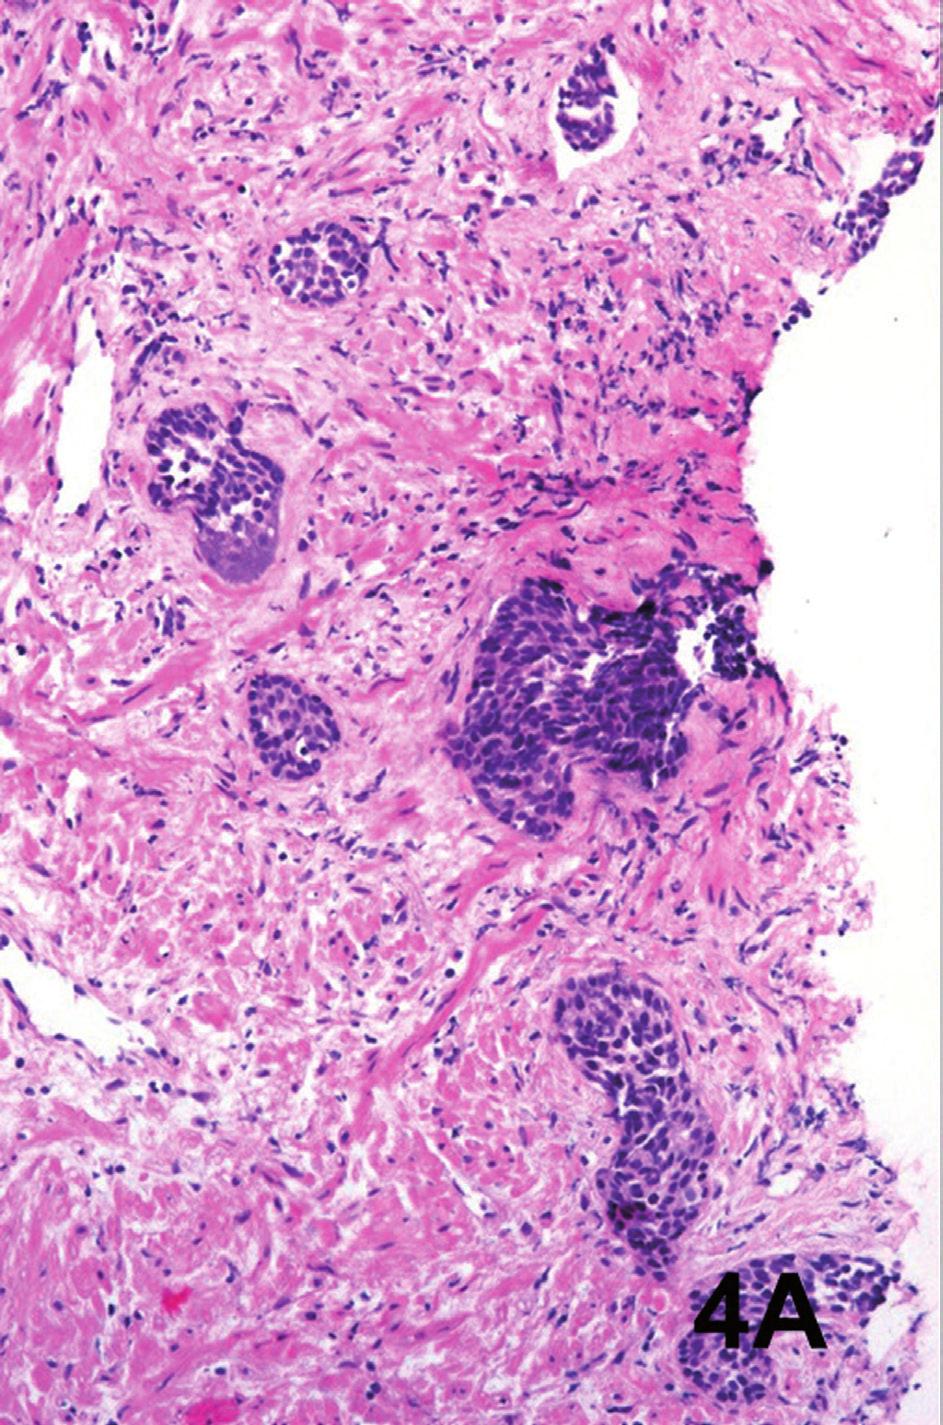 ibju Low grade urothelial carcinoma in prostate biopsy Figure 3 A - Low grade urothelial carcinoma in an isolated histological field (case 2).